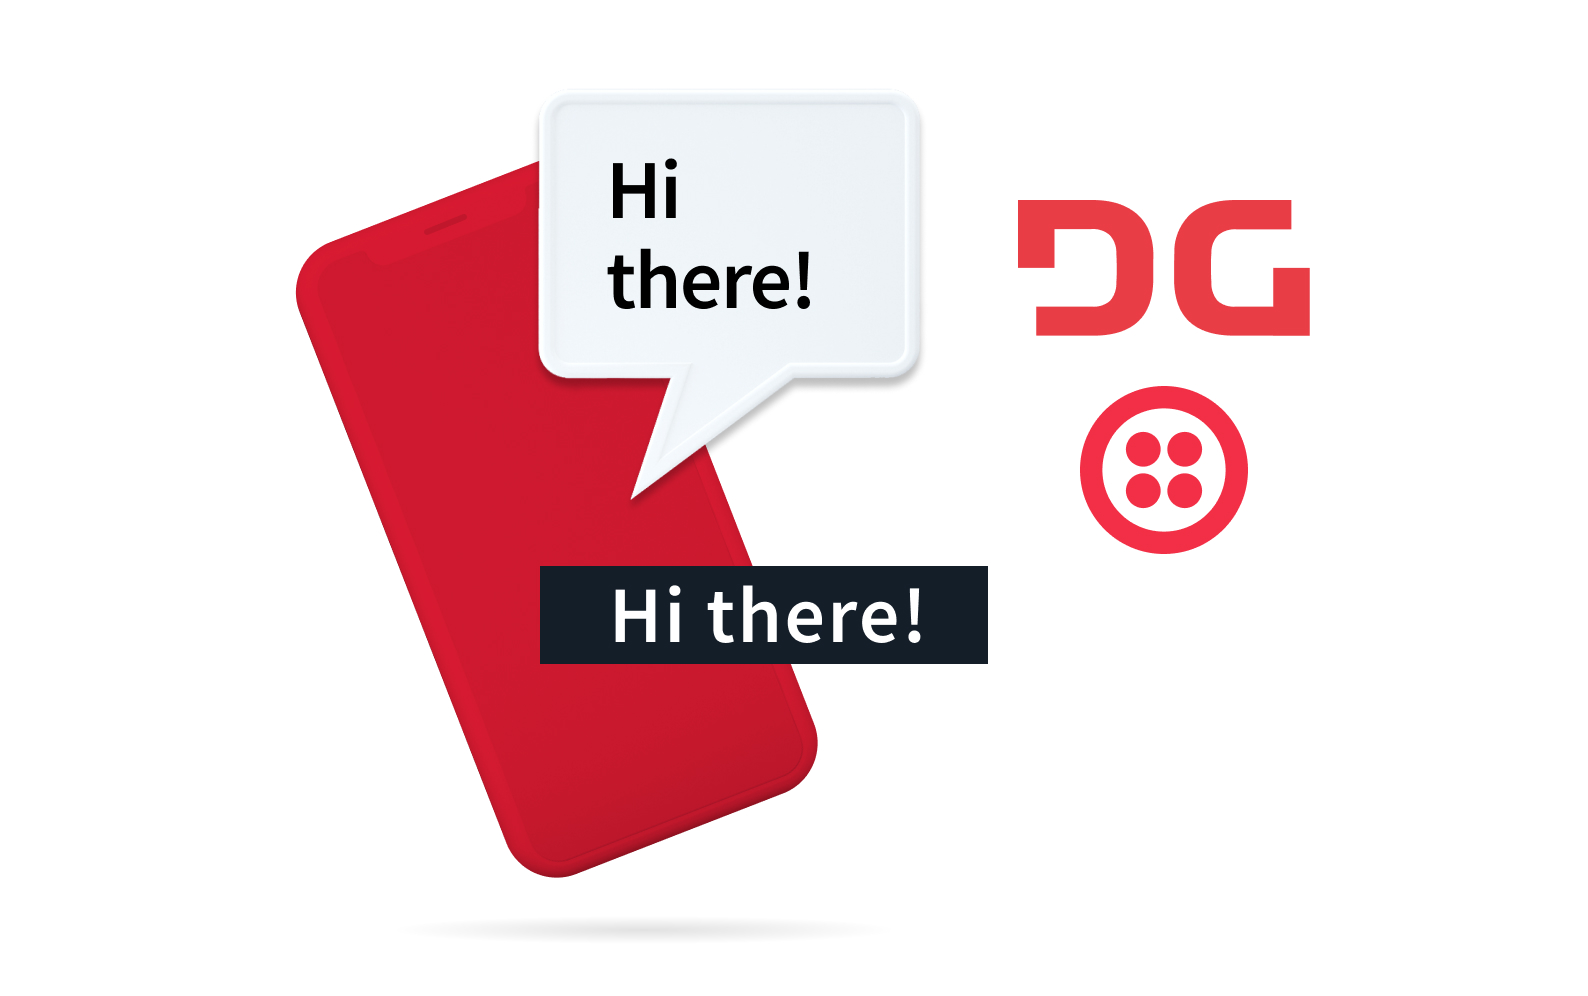 Blog title image for the blog post: Transcribing Twilio Voice Calls in Real-Time with Deepgram